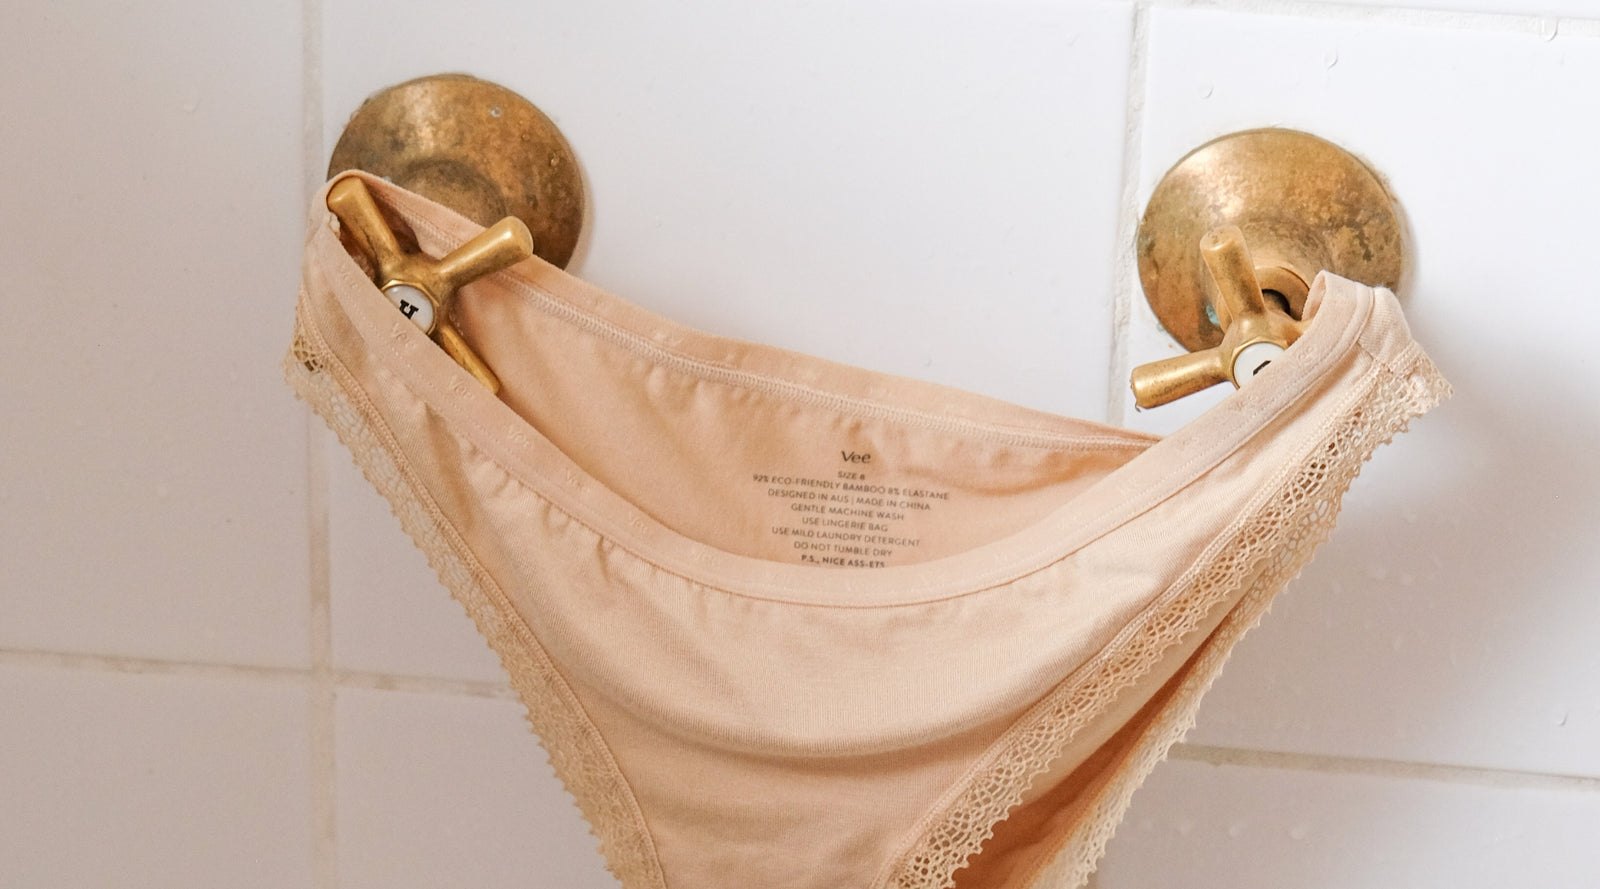 Life saver': Blogger shares SIMPLE trick for removing stains in underwear